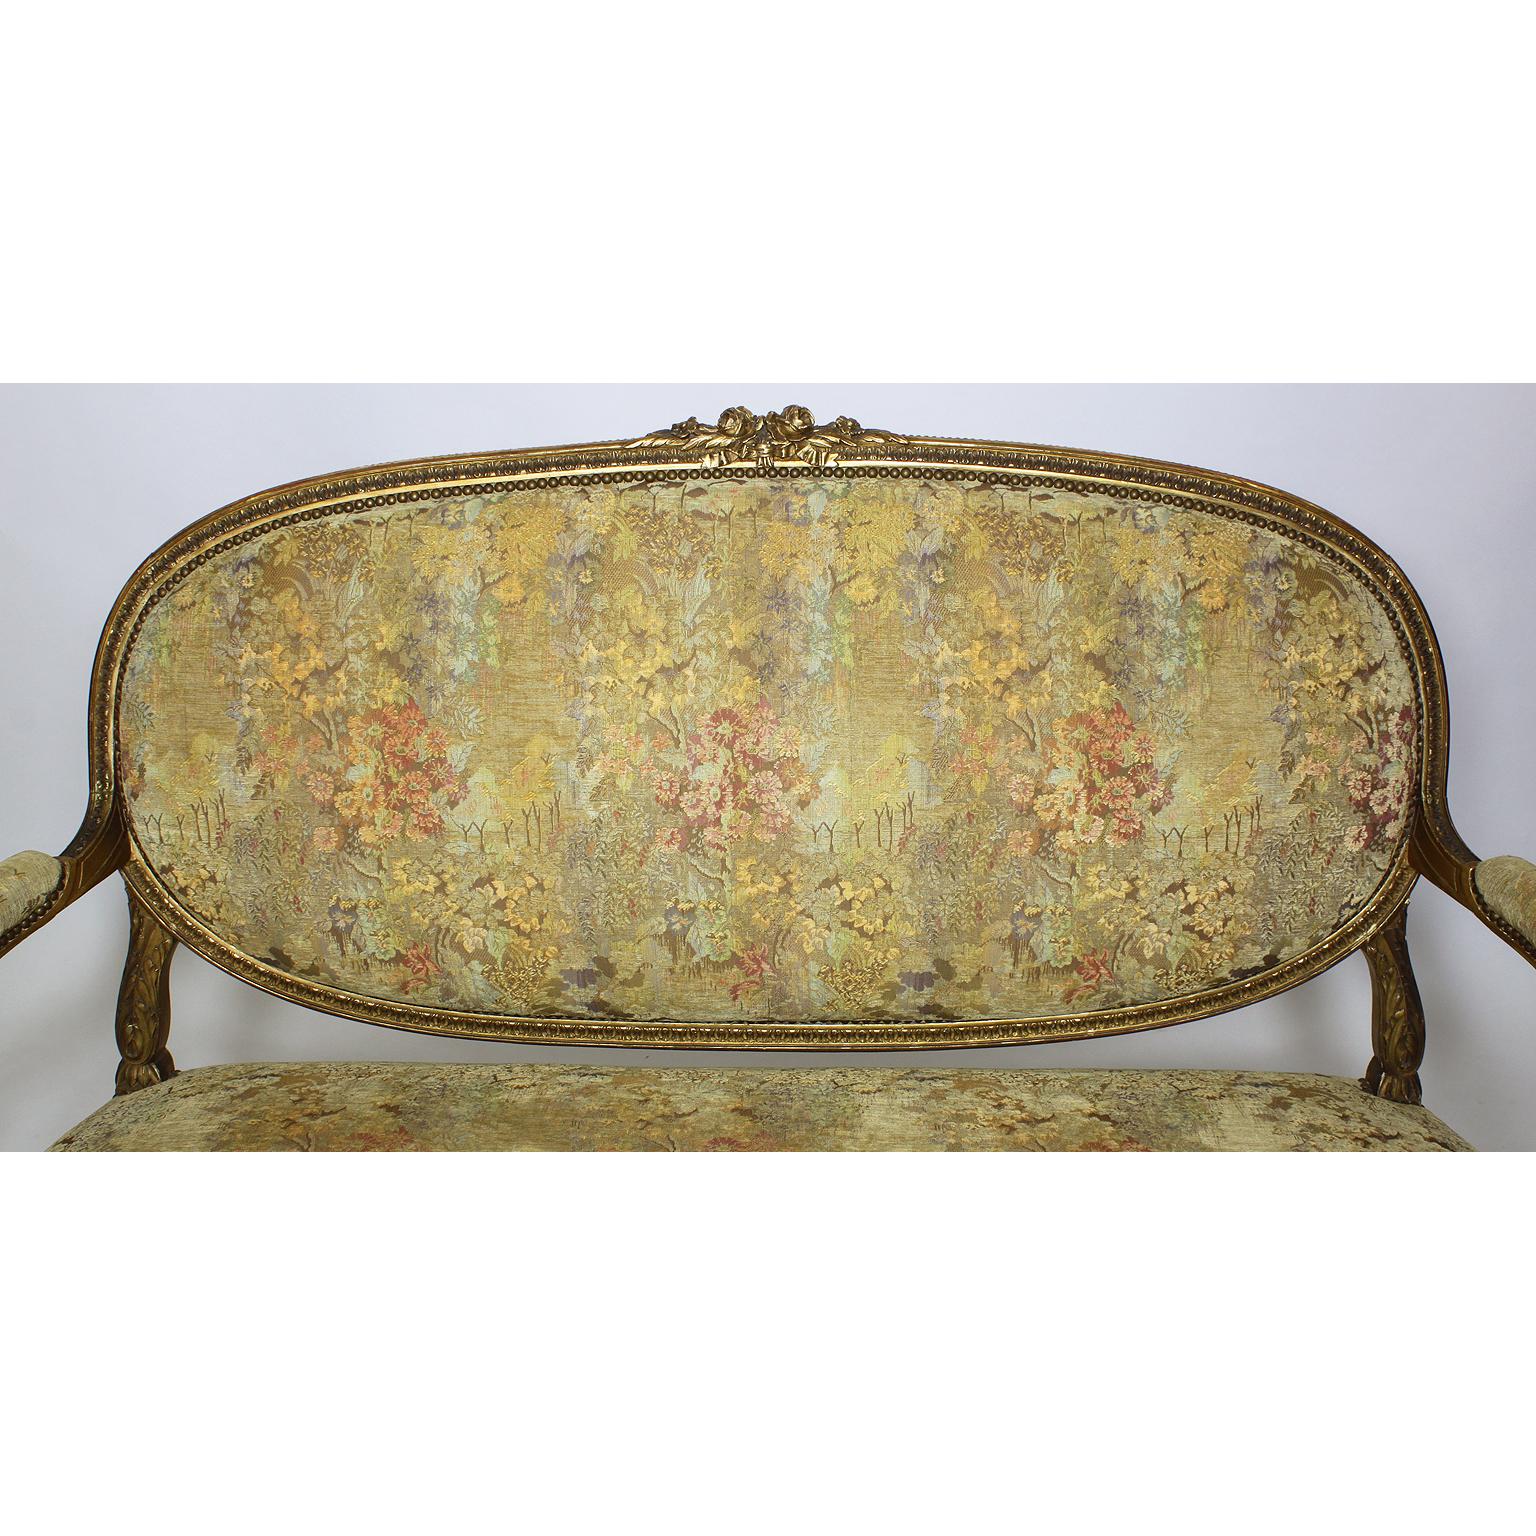 Fine French 19th Century Louis XVI Style Giltwood Carved Five-Piece Salon Suite In Good Condition For Sale In Los Angeles, CA